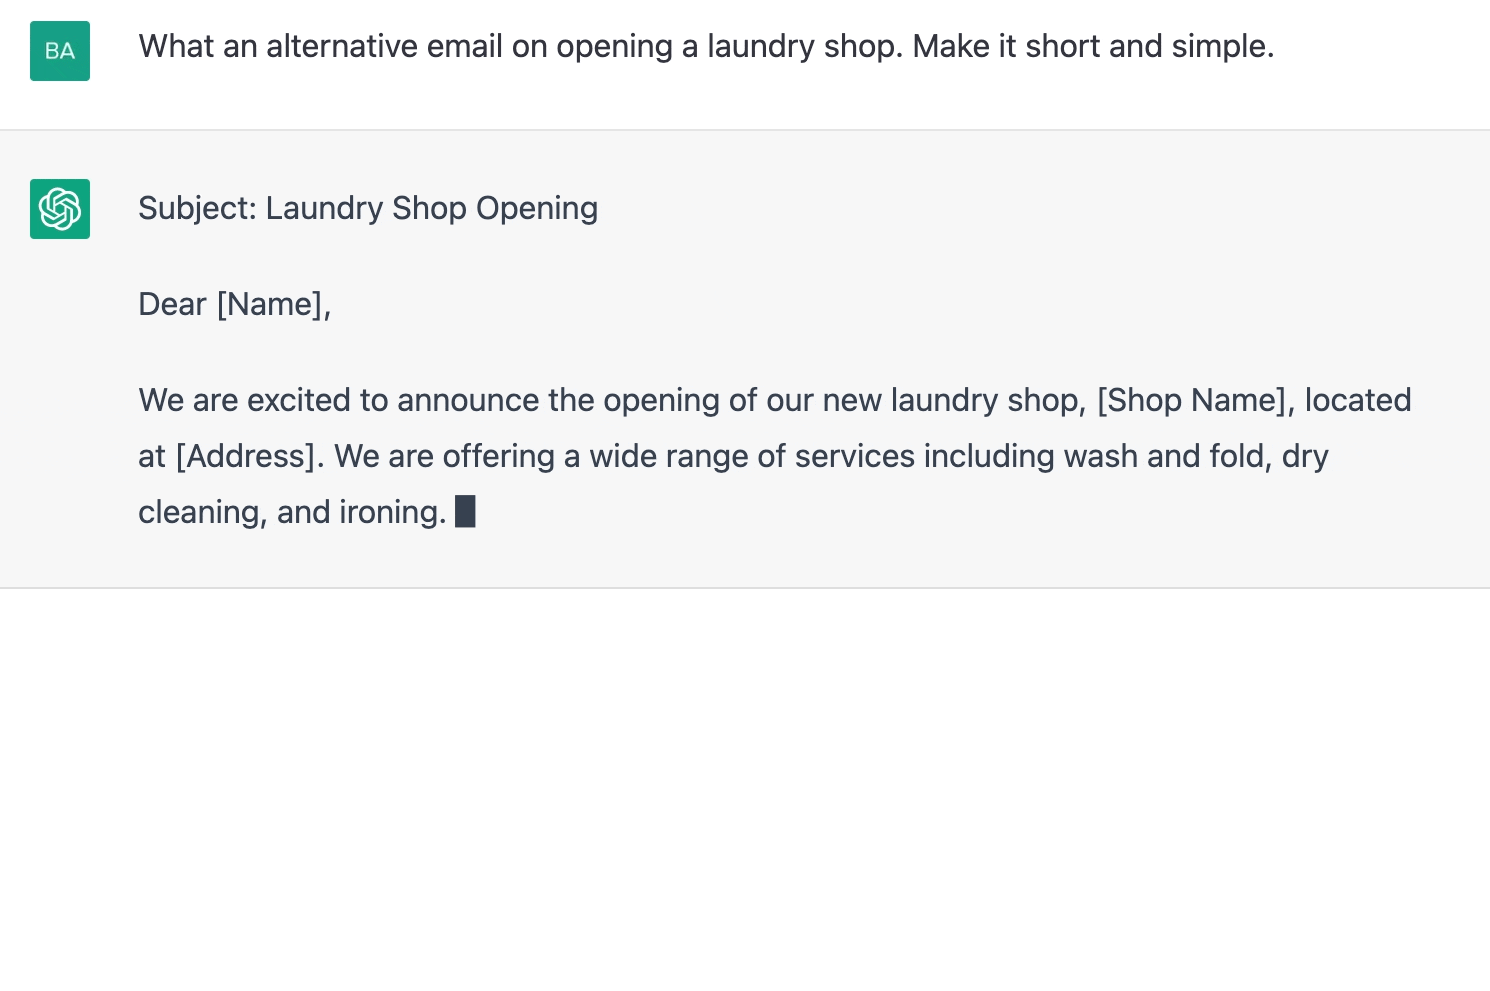 ChatGPT prompt about alternative email on opening a laundry shop